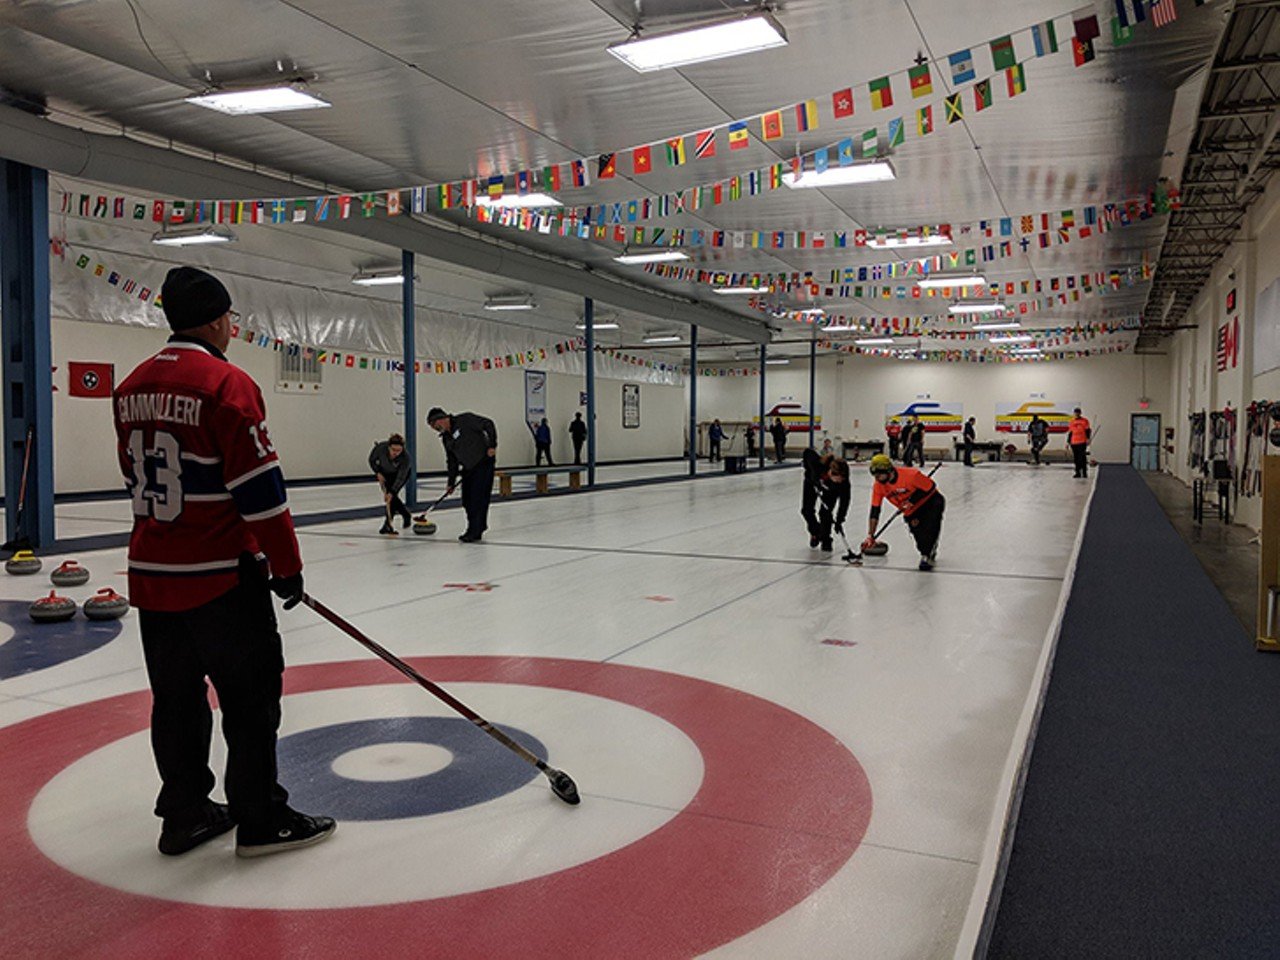 Cincinnati Curling Club
5150 Duff Drive, West Chester
Curling took on a new form of popularity in the United States after the American Men&#146;s Curling team took home gold in the 2018 Winter Olympics. If you&#146;re interested in seeing what all the hype surrounding the sport is about, or just looking to try something new, the Cincinnati Curling Club has its own facility where you can learn how to curl like the Olympians. Two-hour Instructional courses start at $45. Instructional leagues run for three weeks, where you will learn how to incorporate all the finer points and tips for the game while receiving in-game coaching. Instructional leagues start at $100. 
Photo via Facebook/CincinnatiCurlingClub